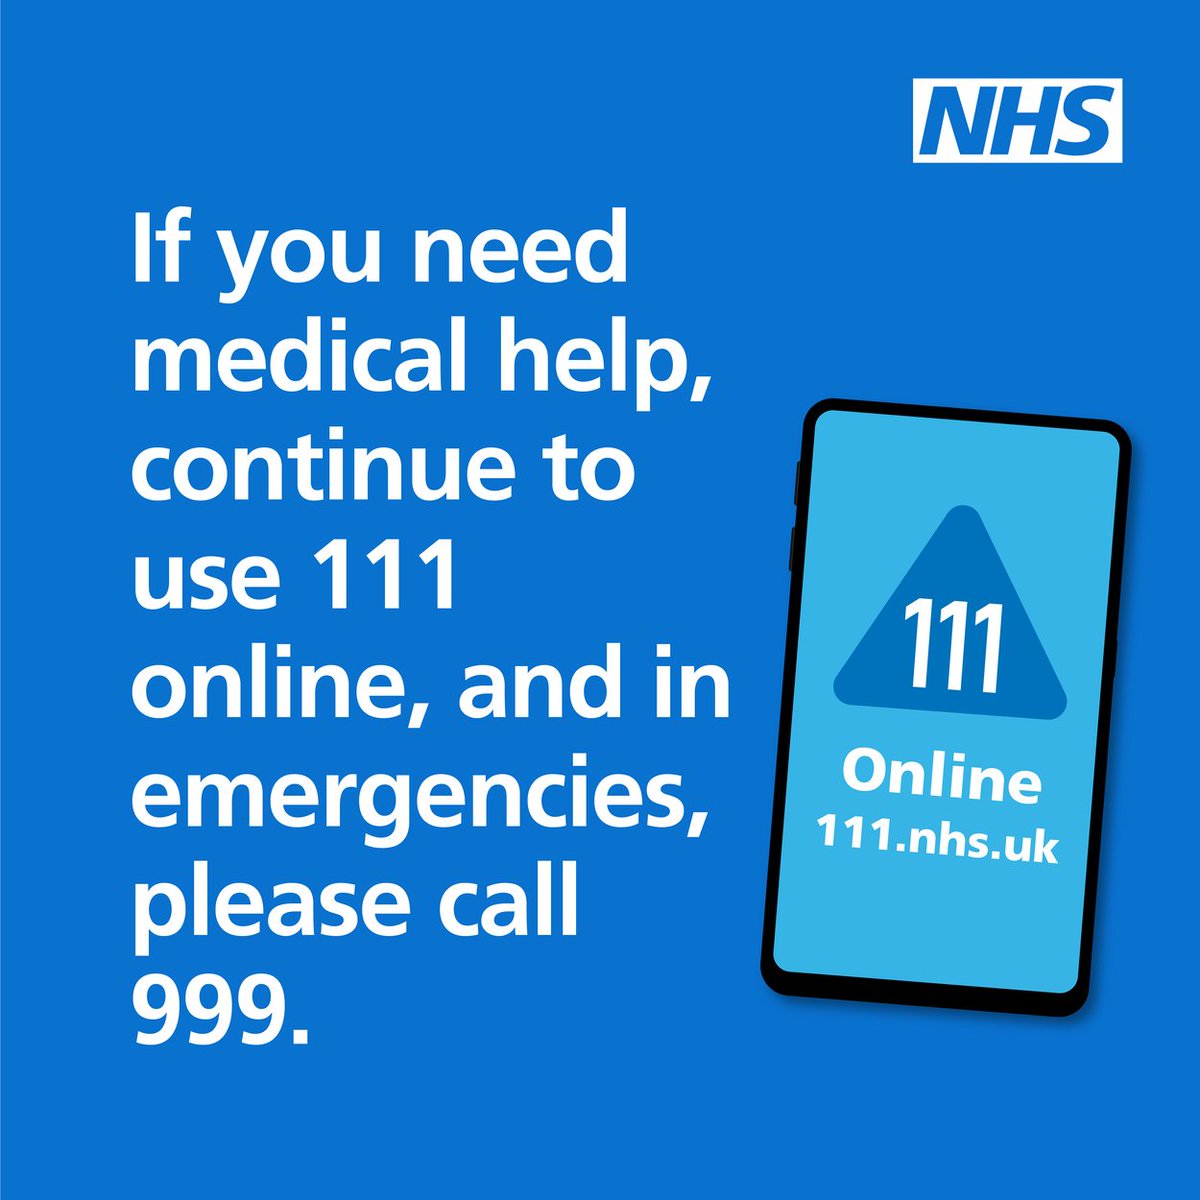 This week, some services will be affected due to strike action. Please continue to come forward for NHS care. If you need medical help, use 111 online and in emergencies, please call 999.